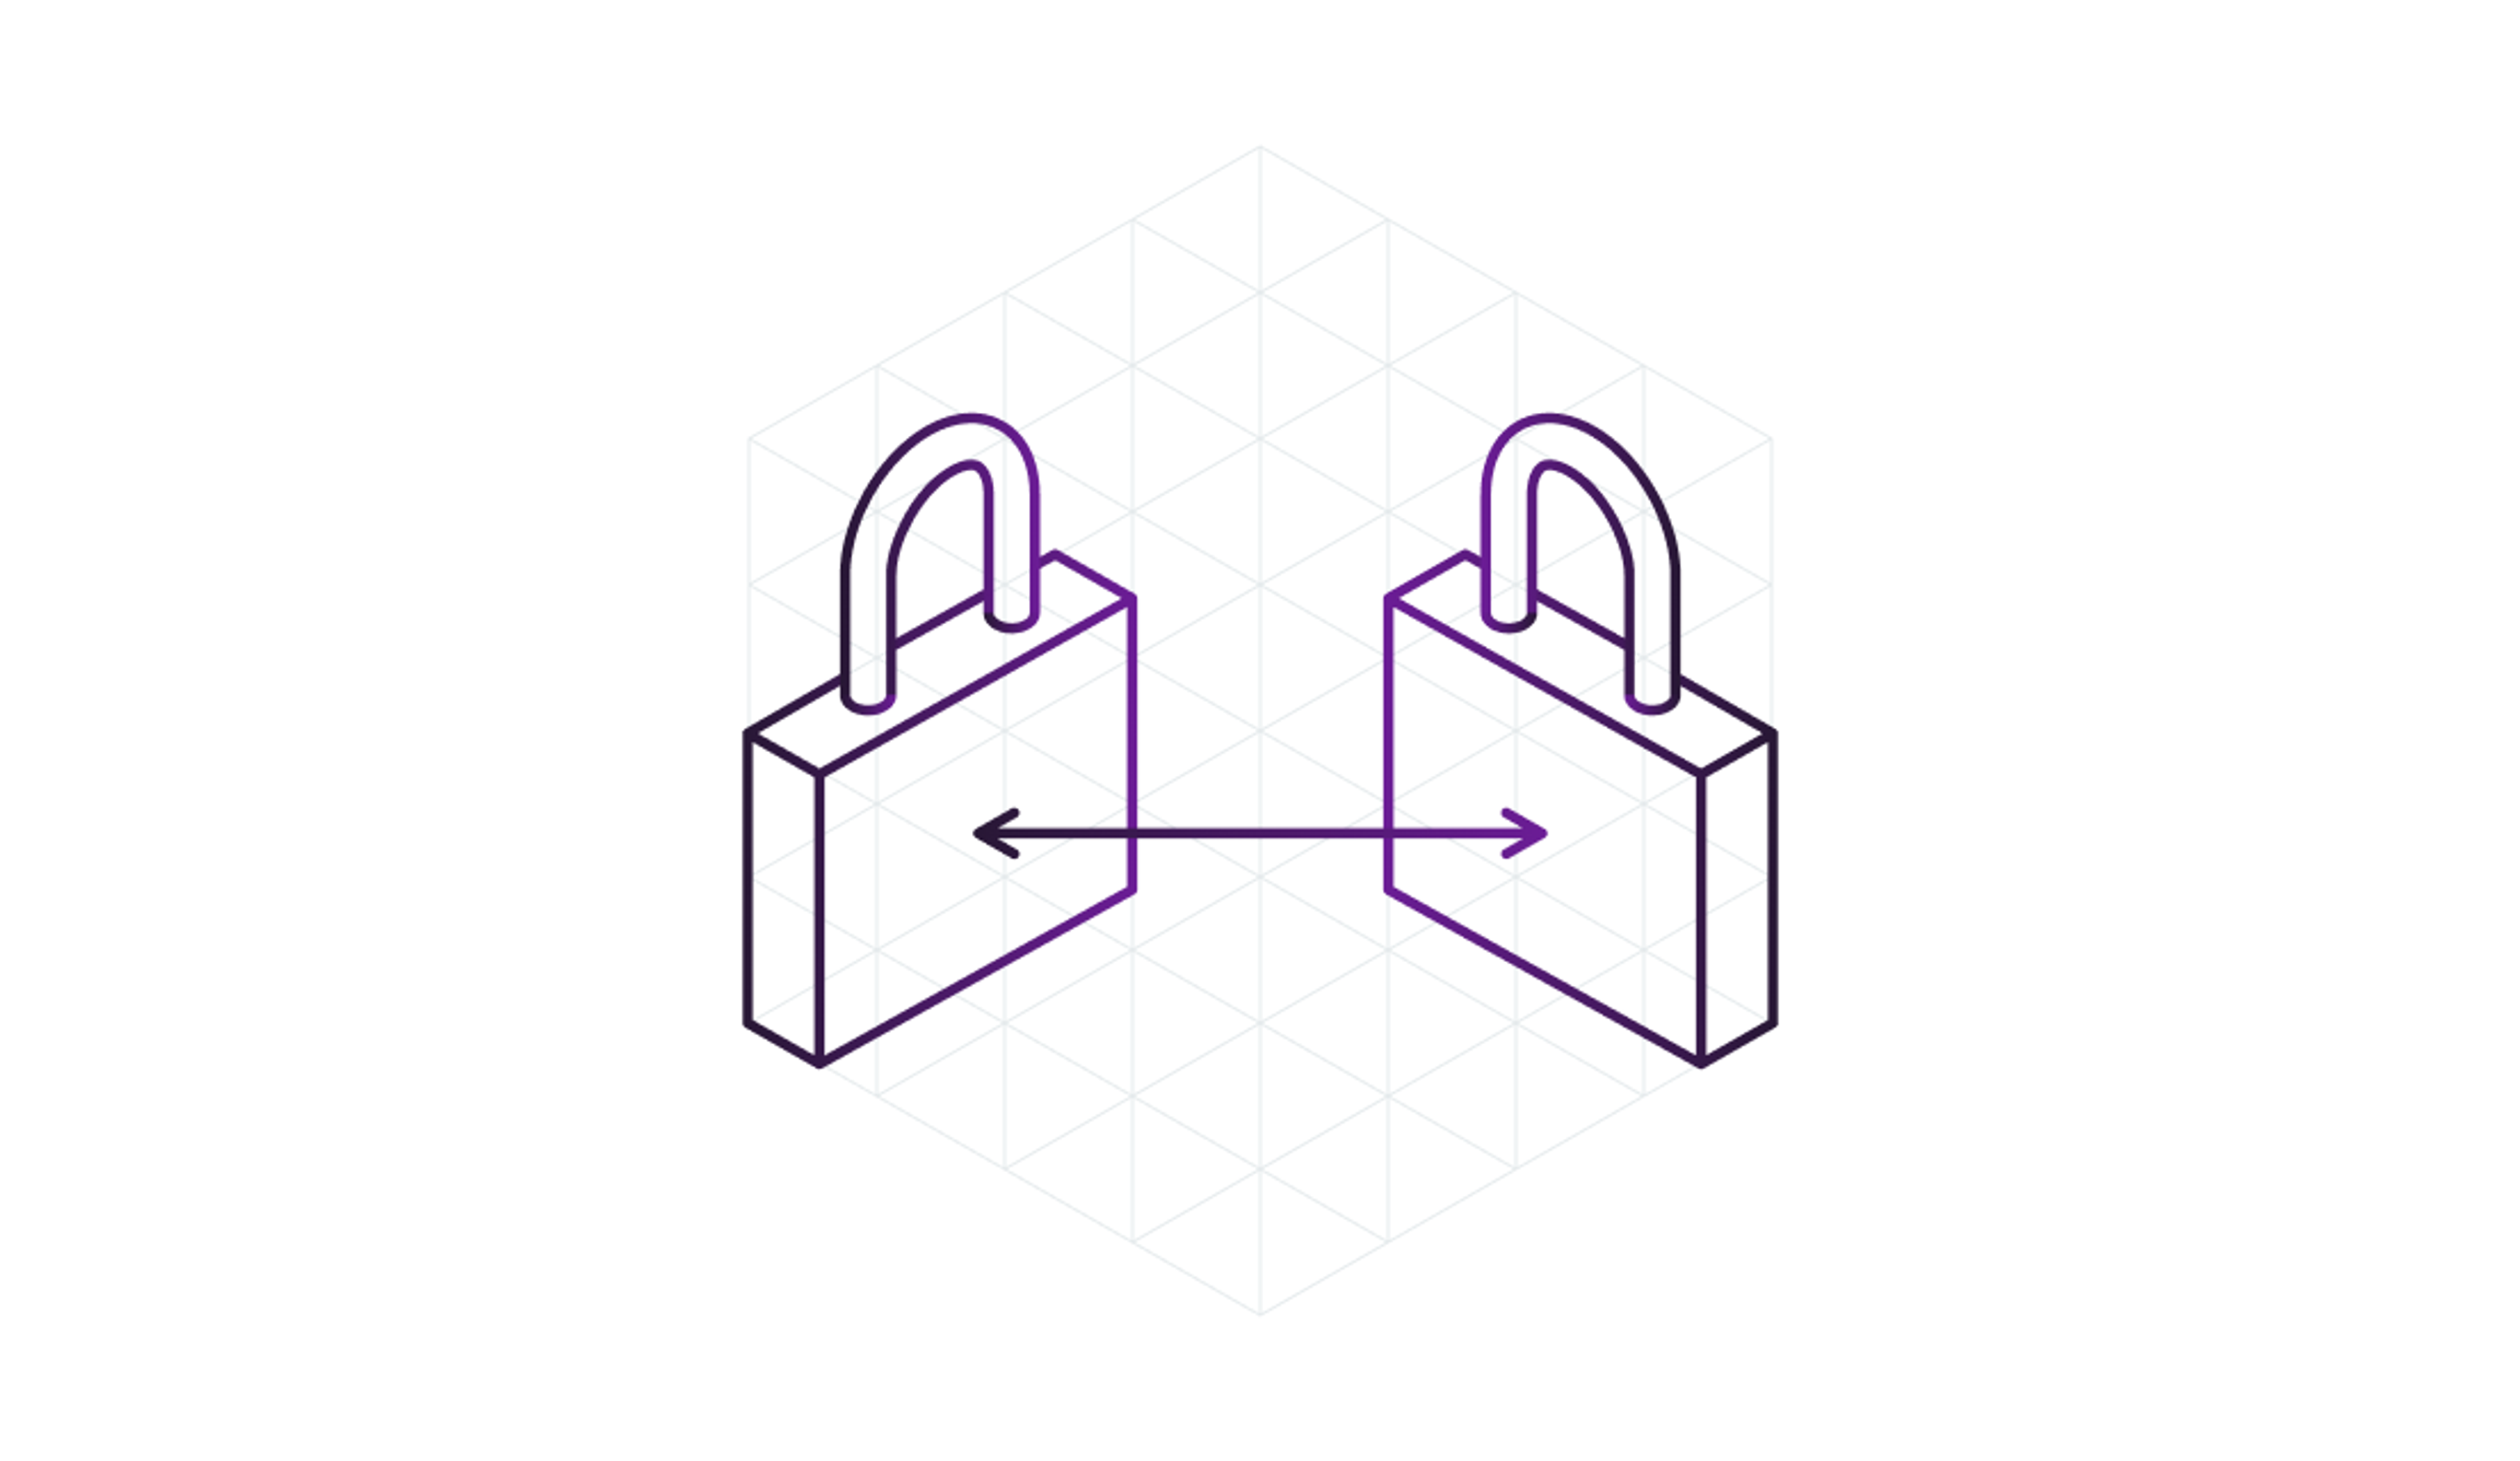 Deploy production-level security and compliance.